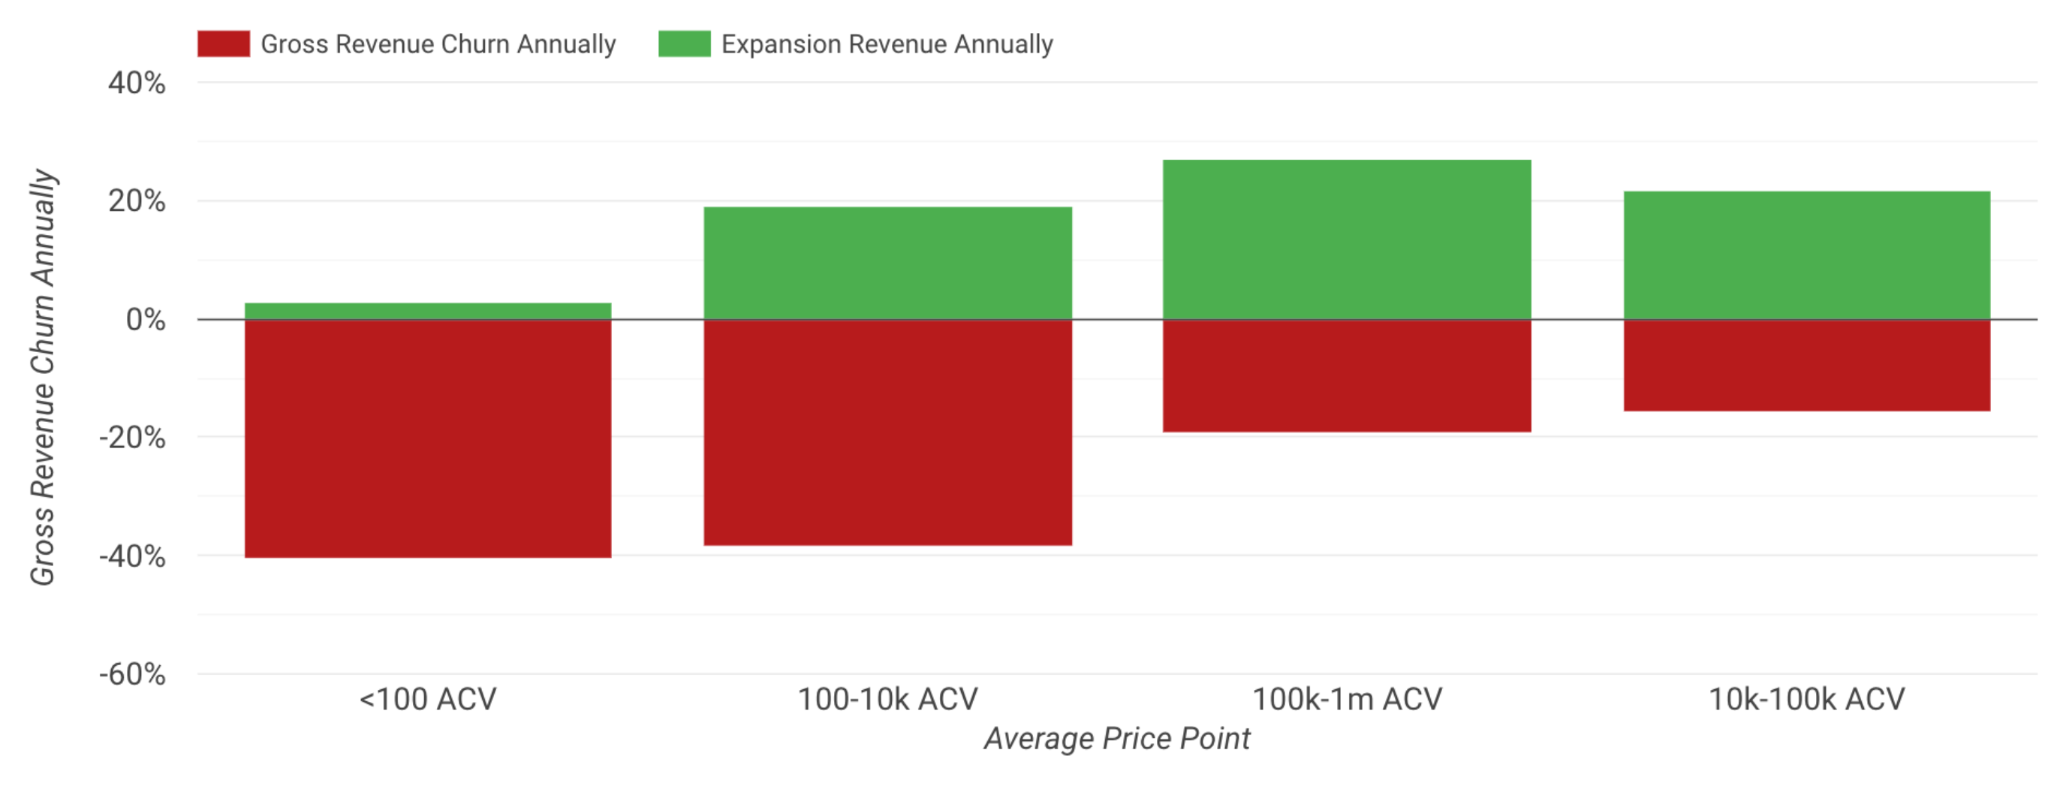 Gross revenue churn annually plotted on average price point